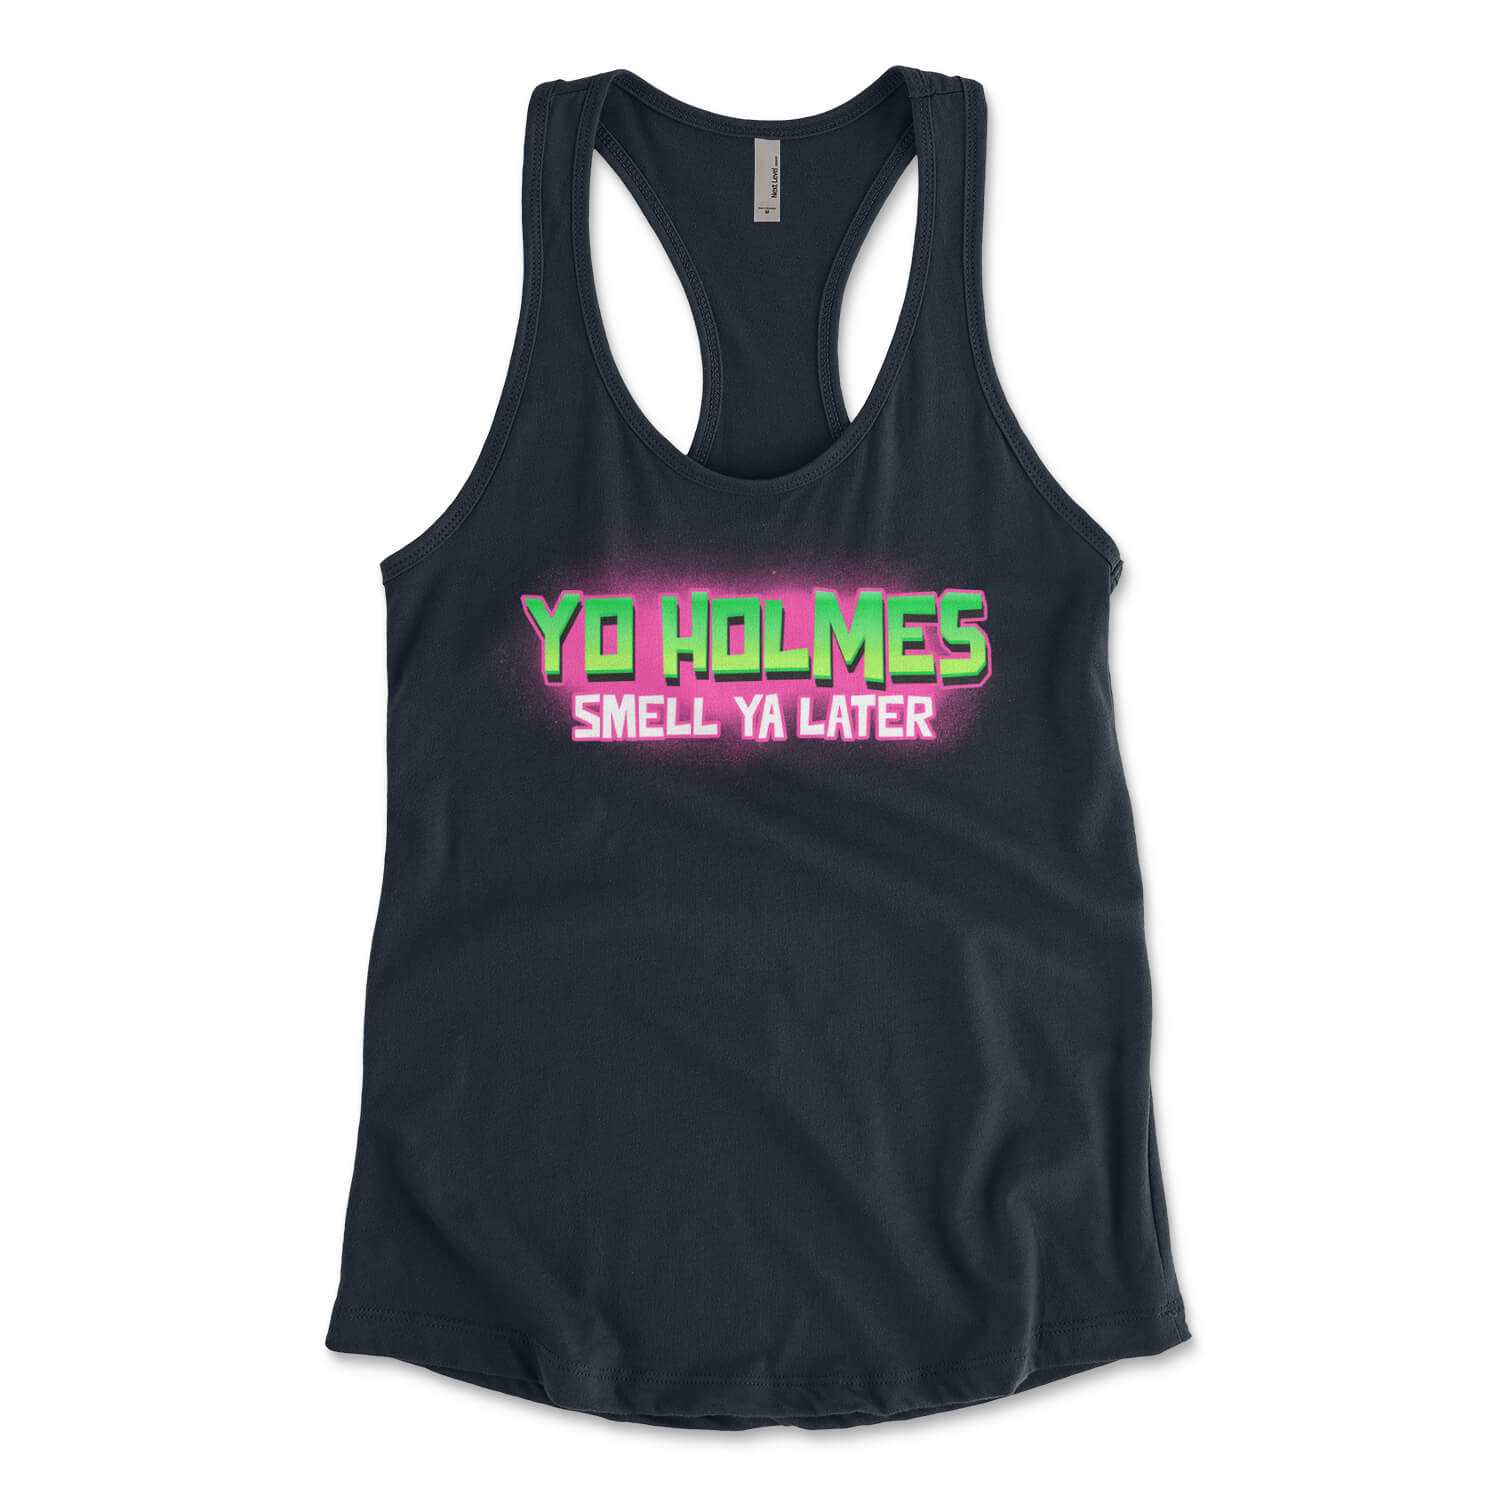 Fresh Prince of Bel-Air Yo Holmes smell ya later navy blue womens racerback tank top from Phillygoat